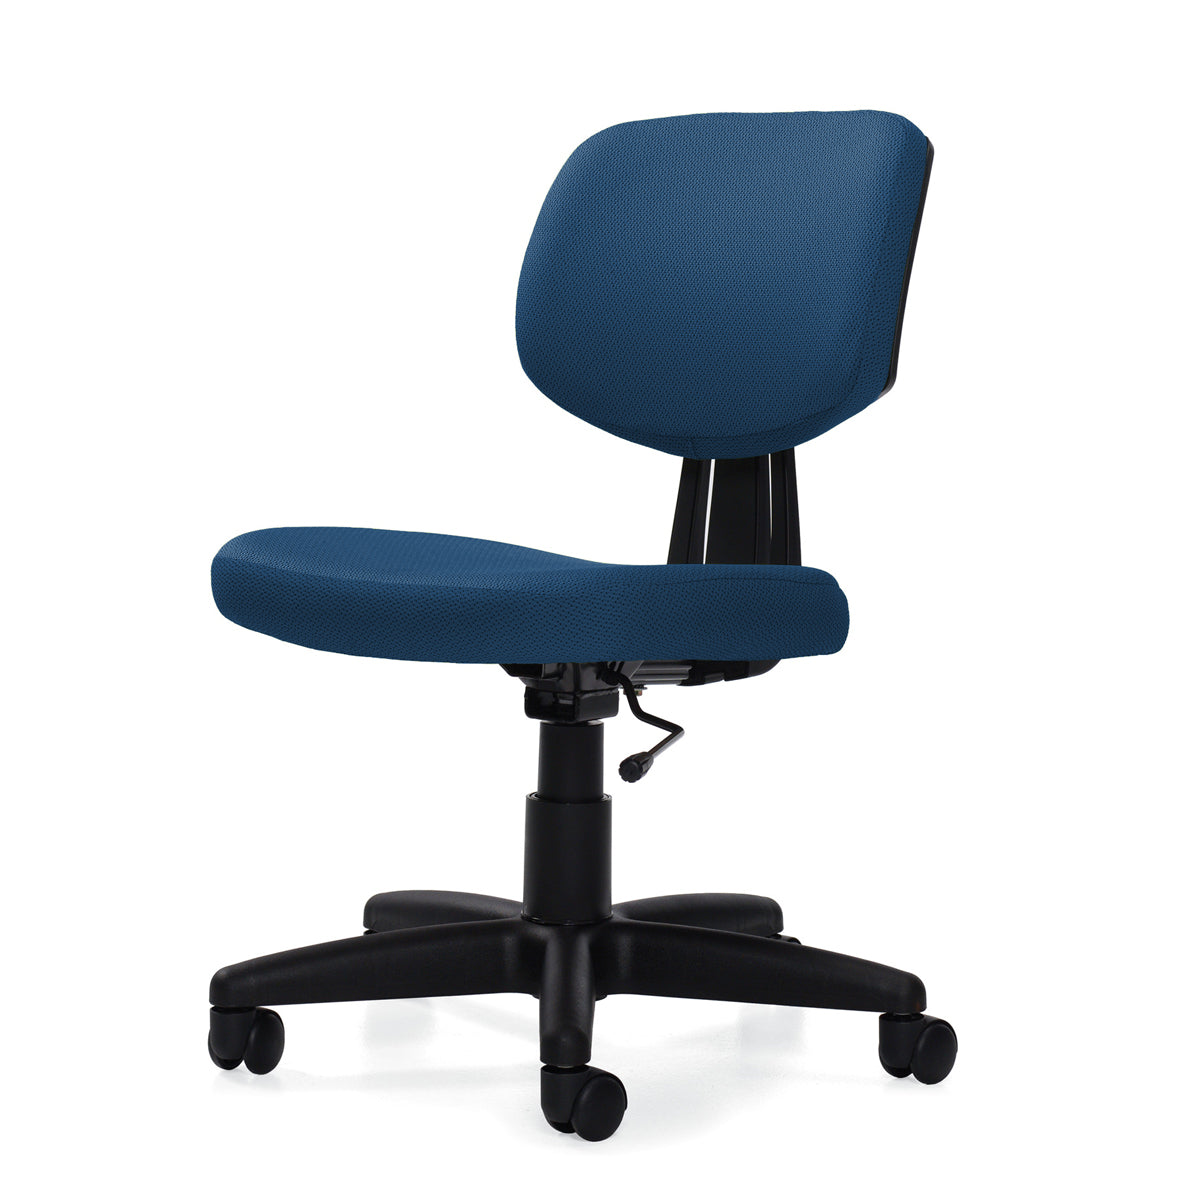 Cobalt blue youth/student task chair.